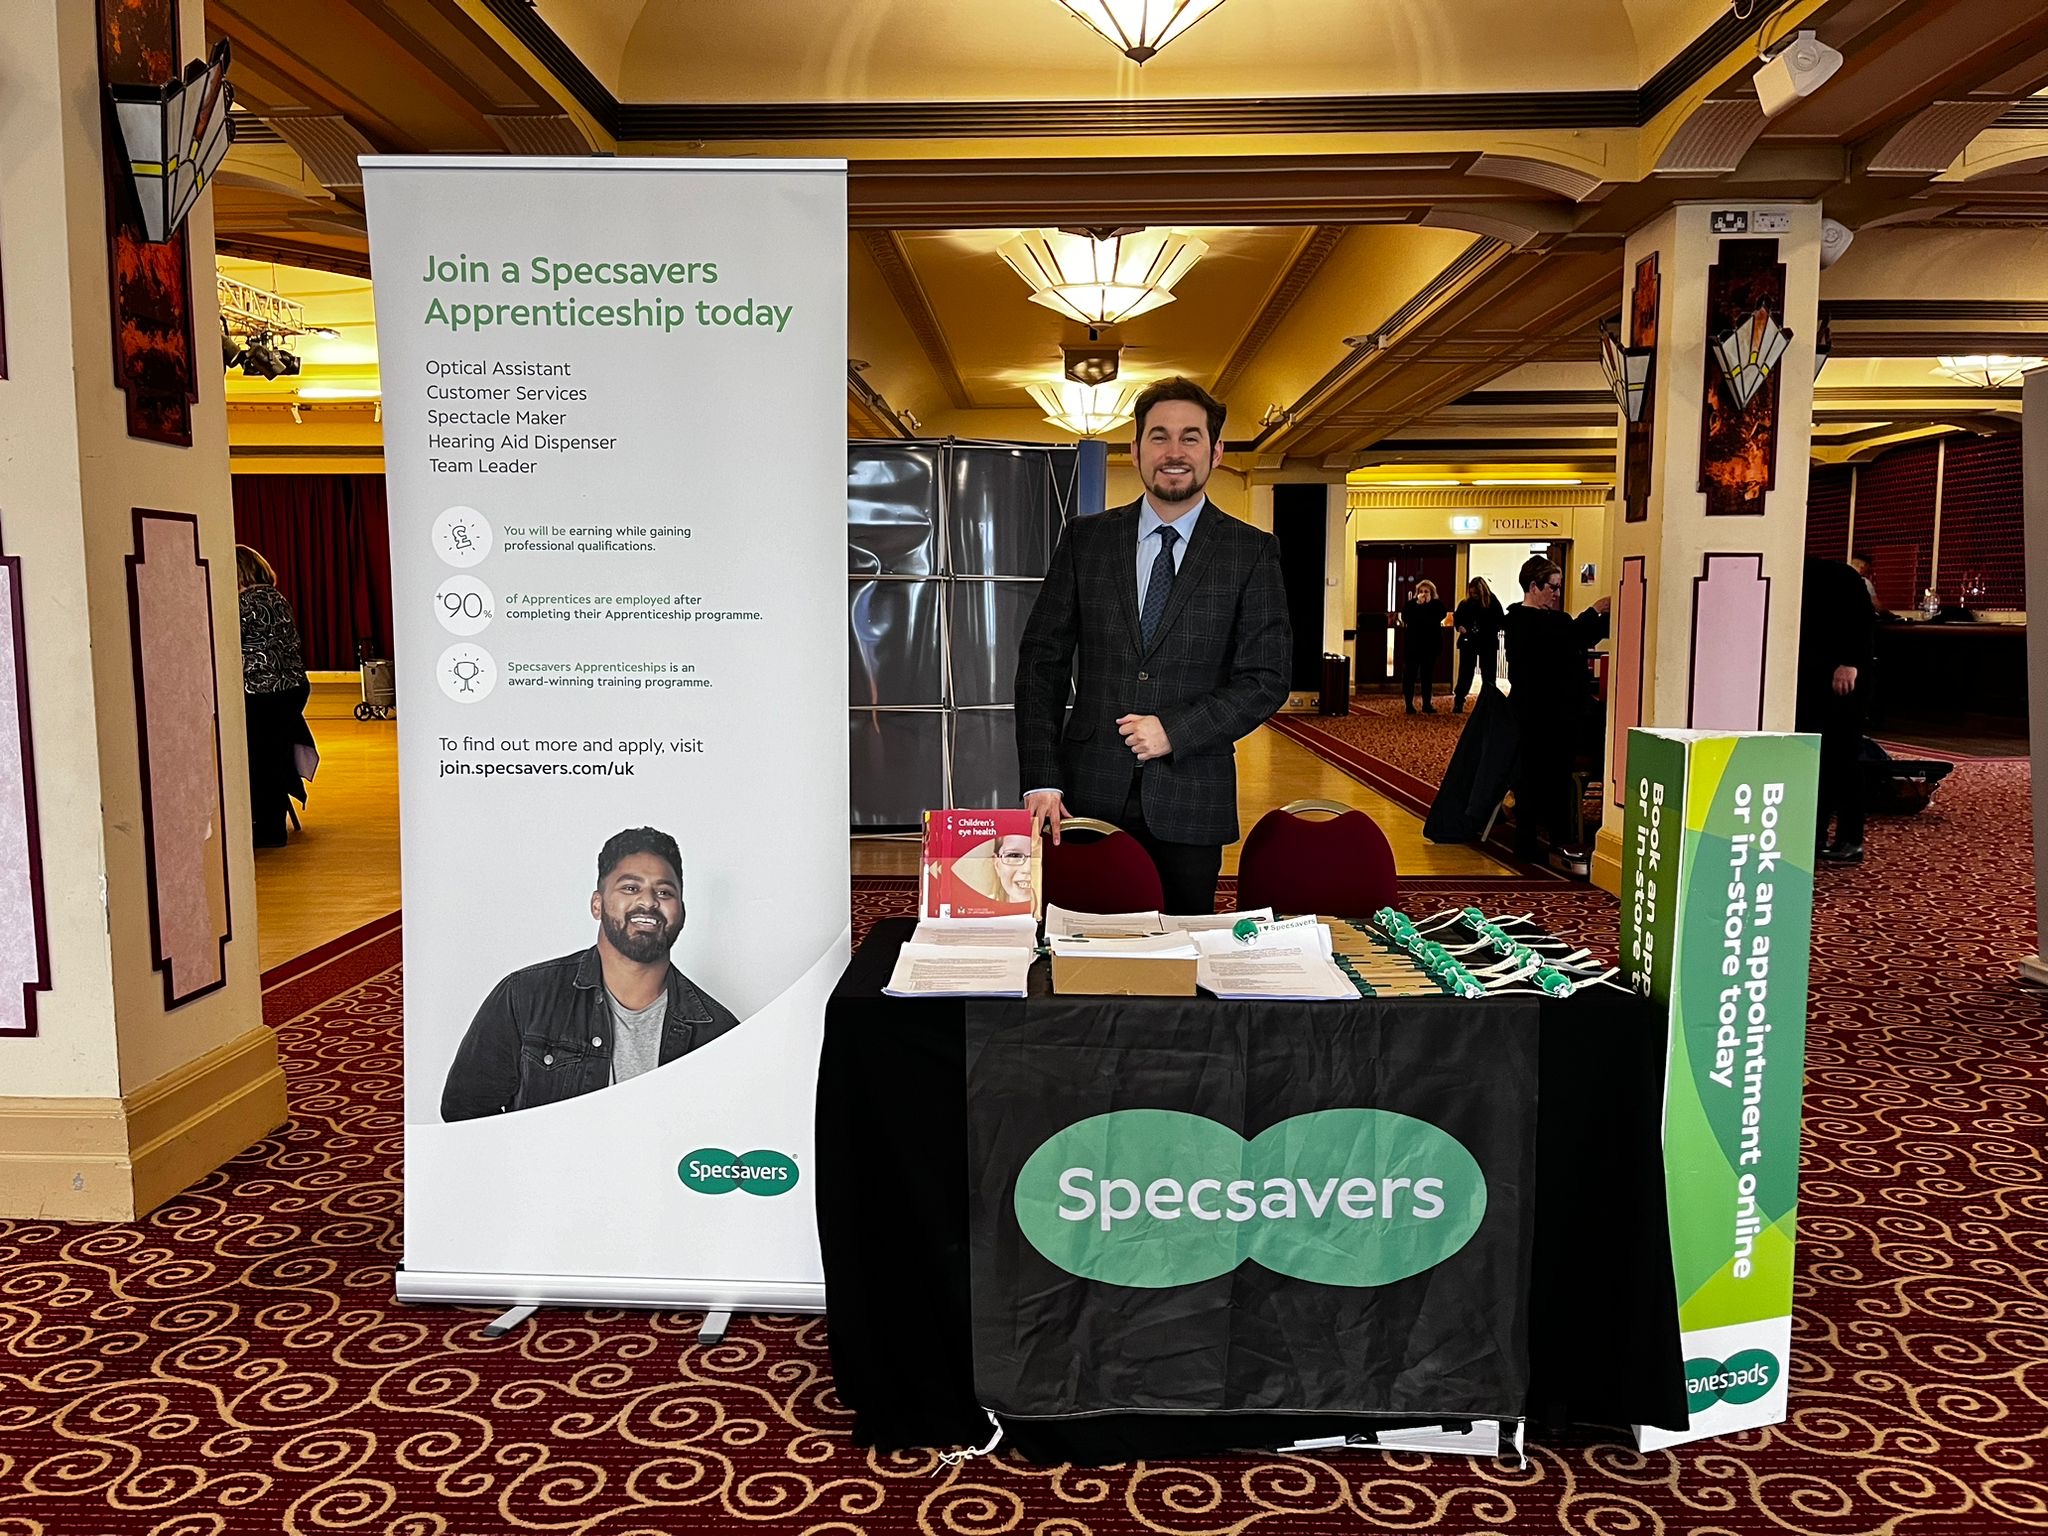 Specsavers at our event in Bournemouth